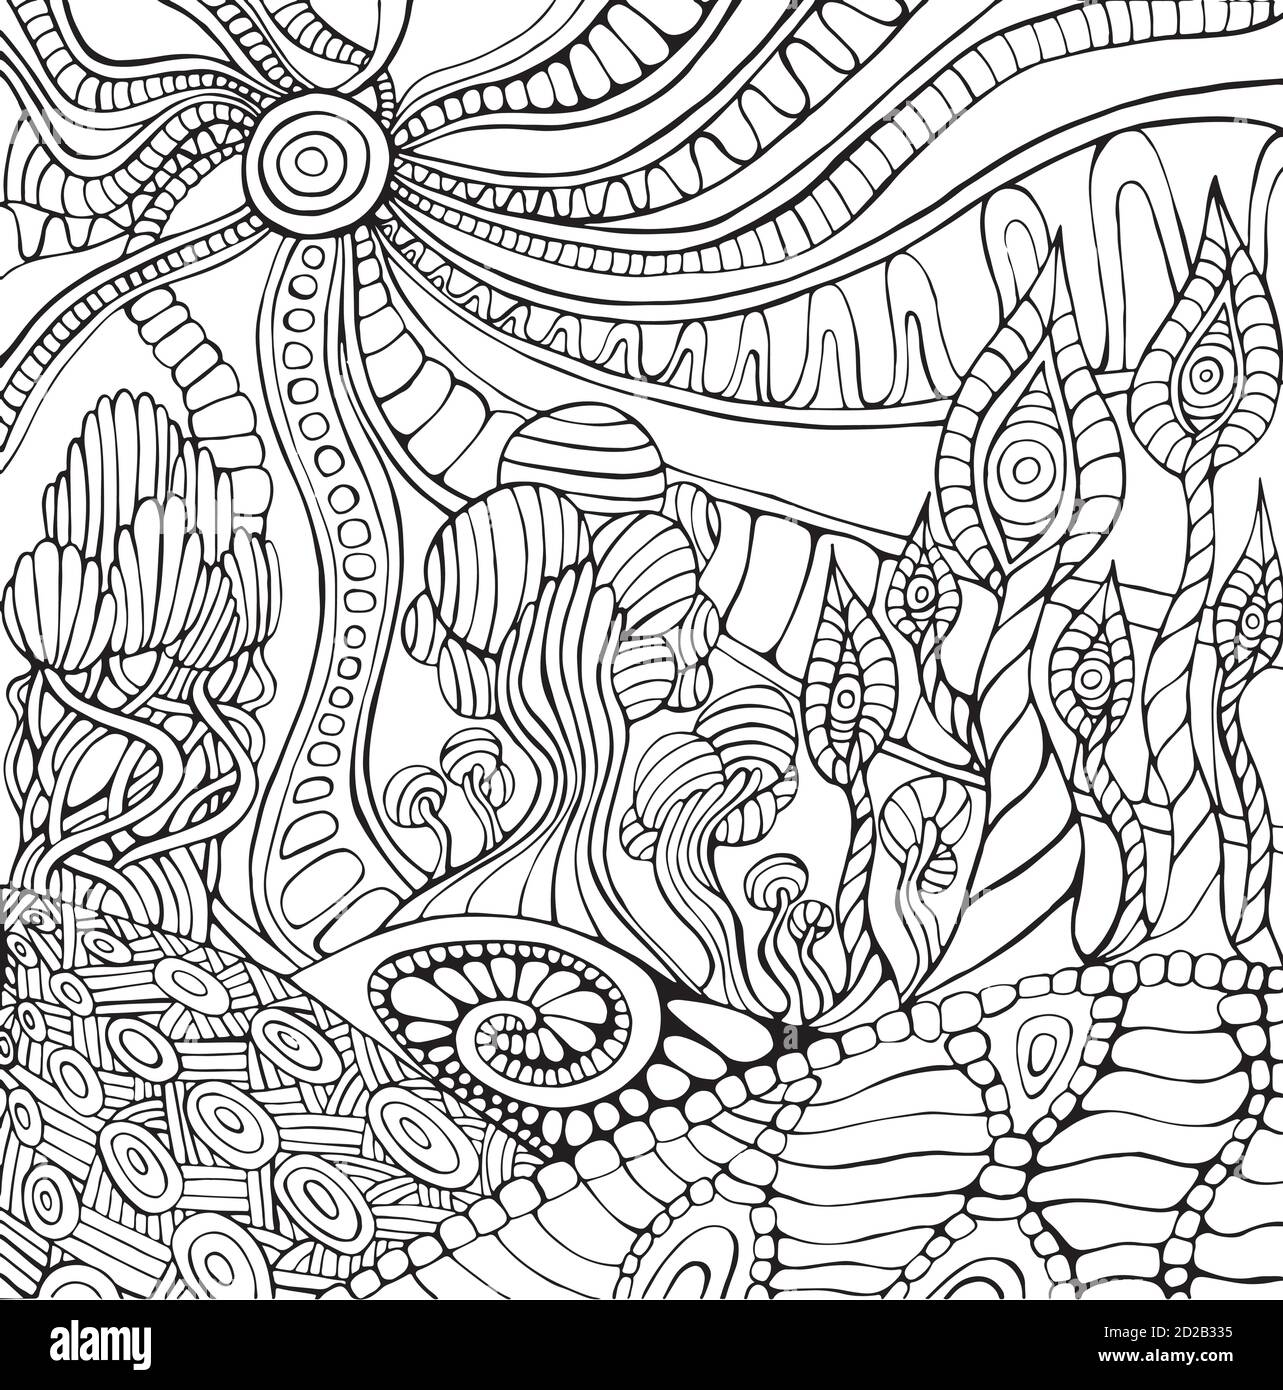 Doodle surreal landscape coloring page for adults. Fantastic psy Stock Vector